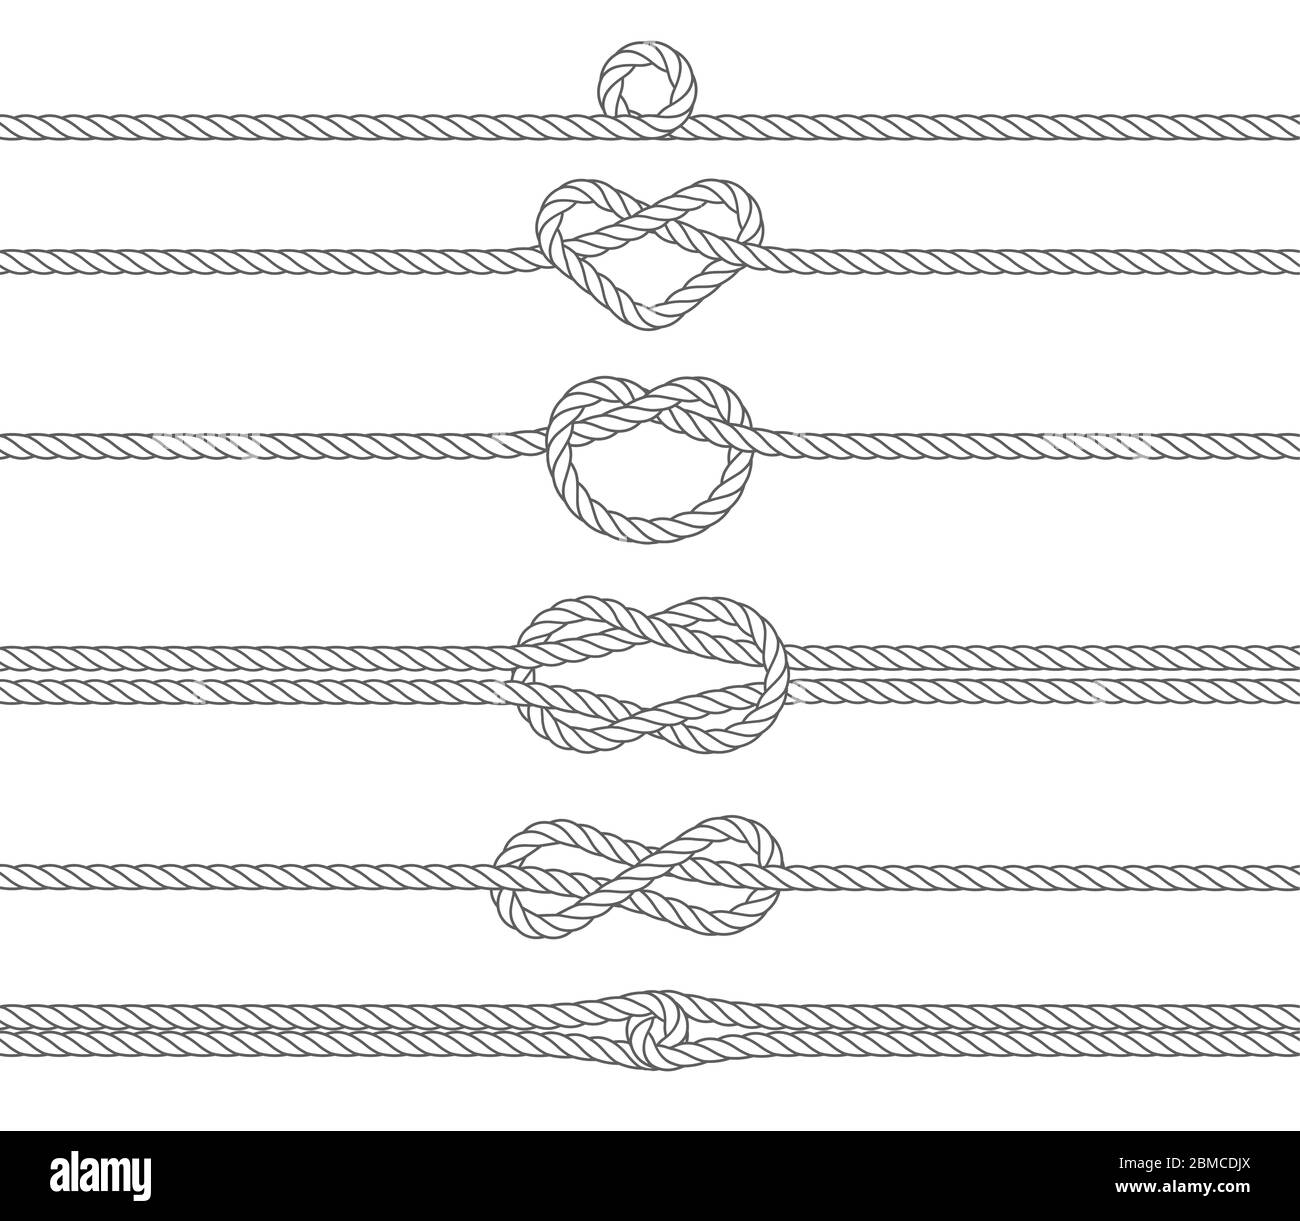 Nautical rope frames and borders, seamless pattern. Marine rope